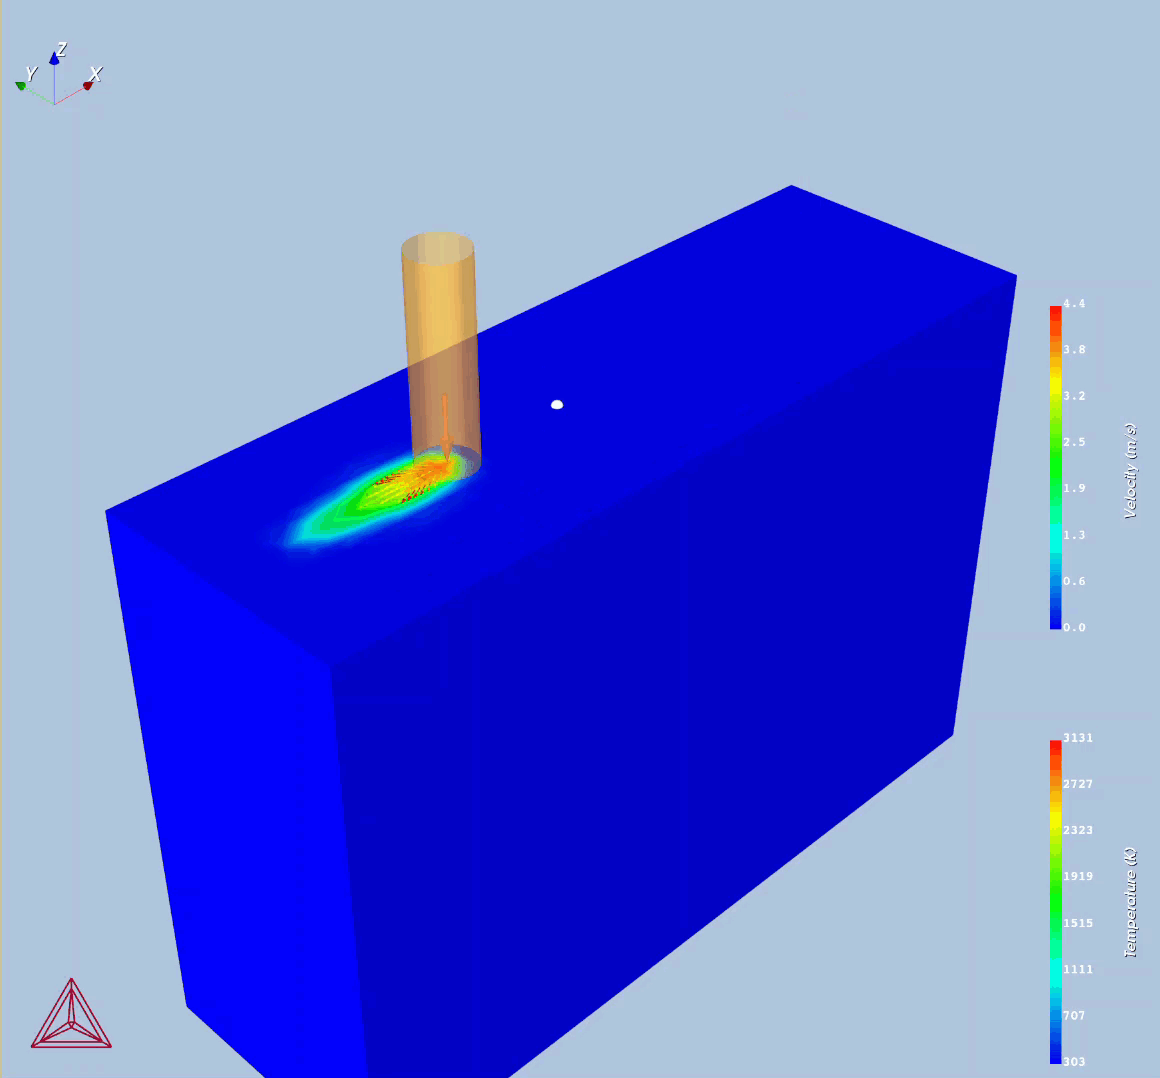 Result of the Single Track simulation showing how the beam moves.